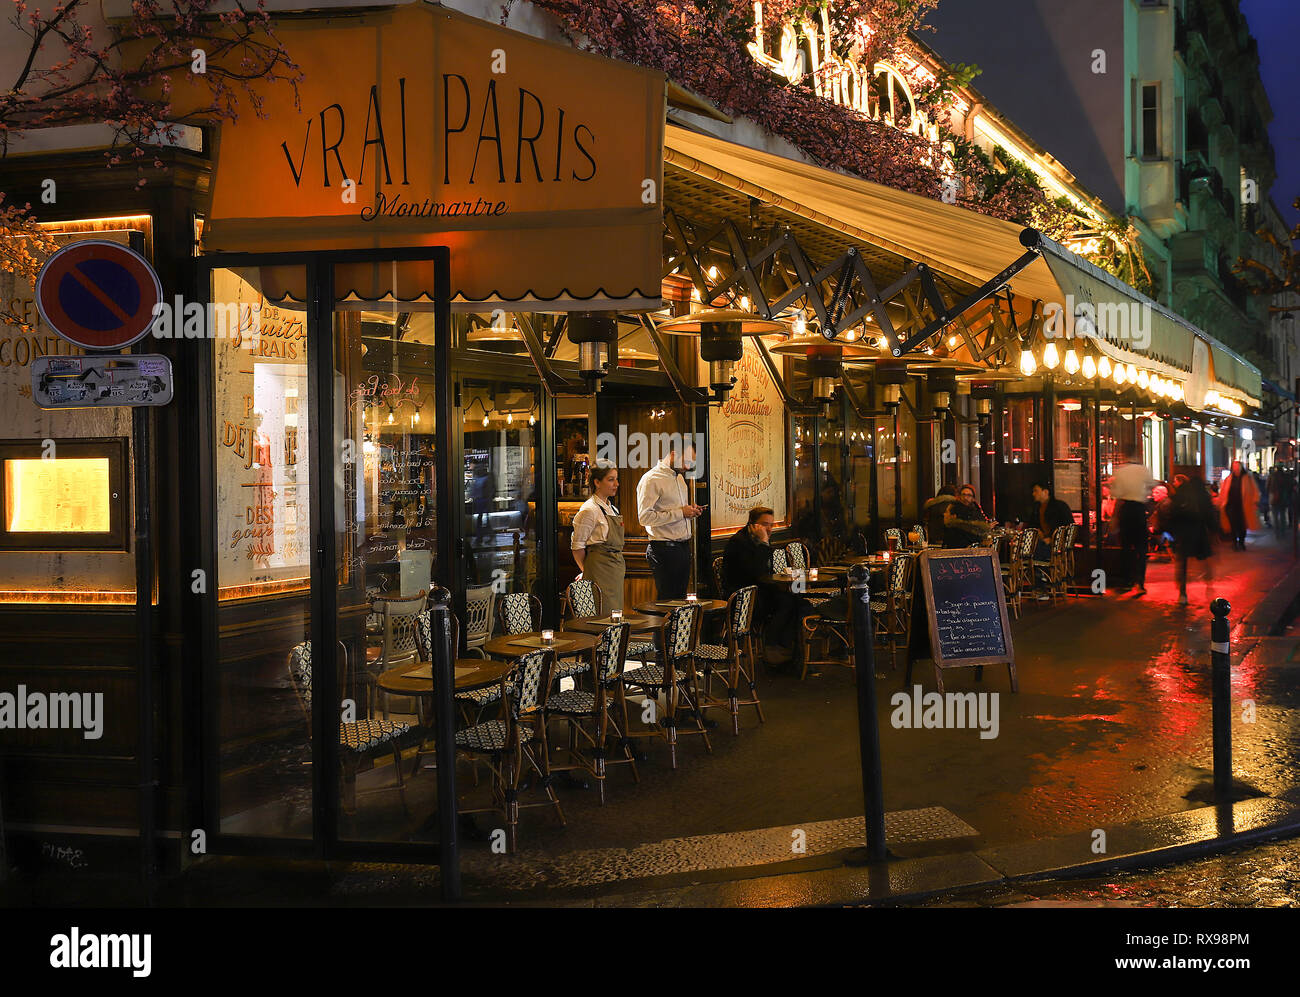 The Cafe Vrai Pars at rainy evening.It is a cafe in the Montmartre, Paris, France. Stock Photo